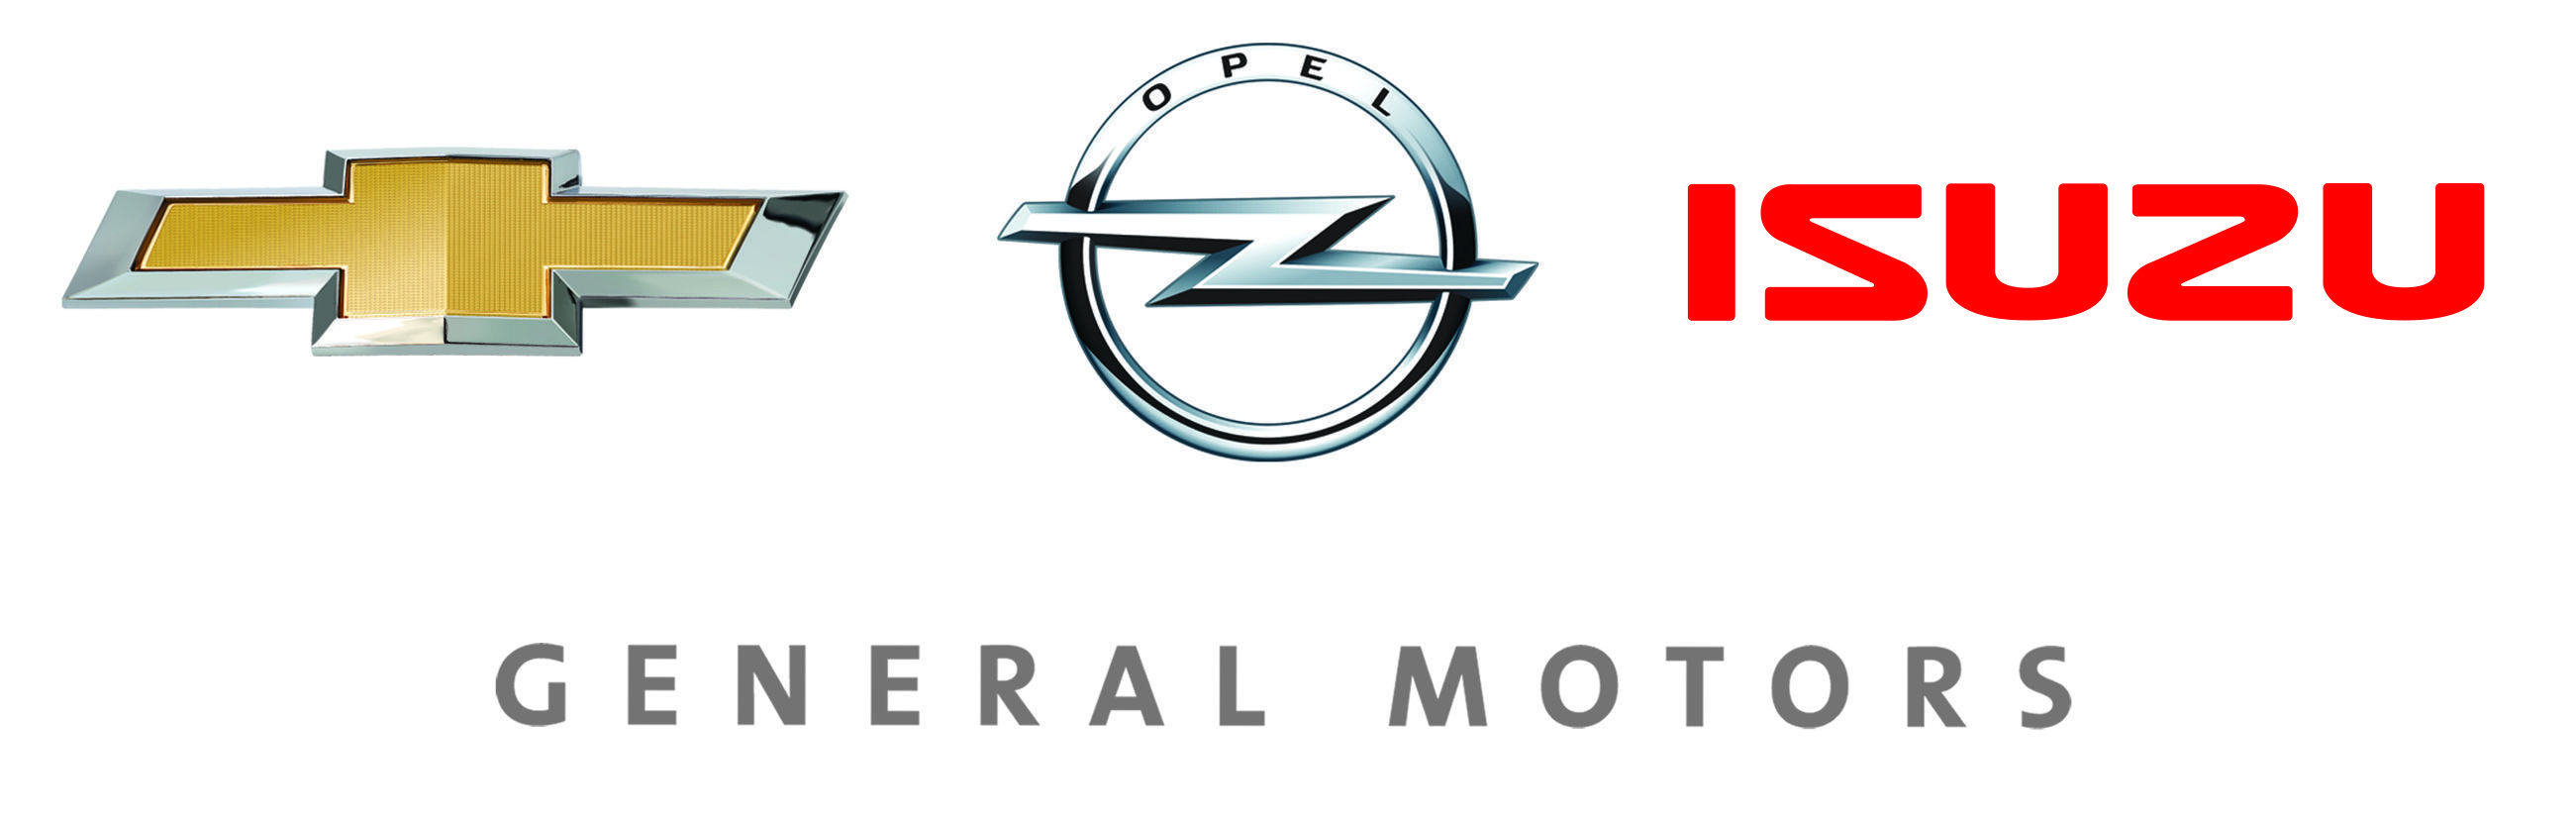 New GM Logo - GM Sold 7.2 Million Vehicles in the First Nine Months of 2015